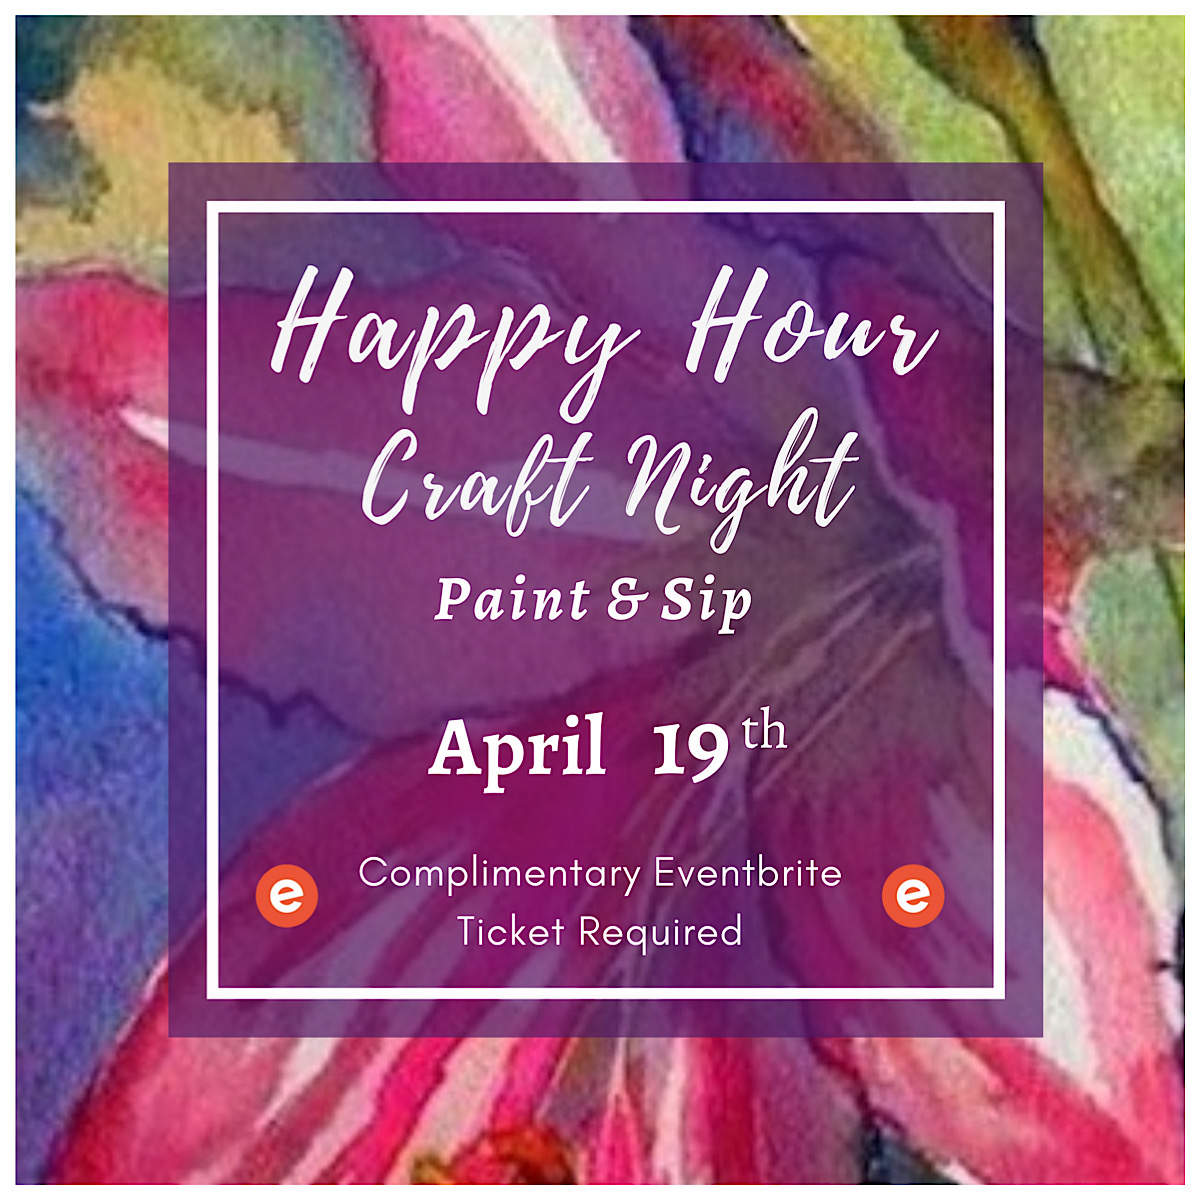 Looking forward to tomorrow’s #HappyHour #PaintAndSip #CraftEvent with Abrakadoodle and Chef Tiana!